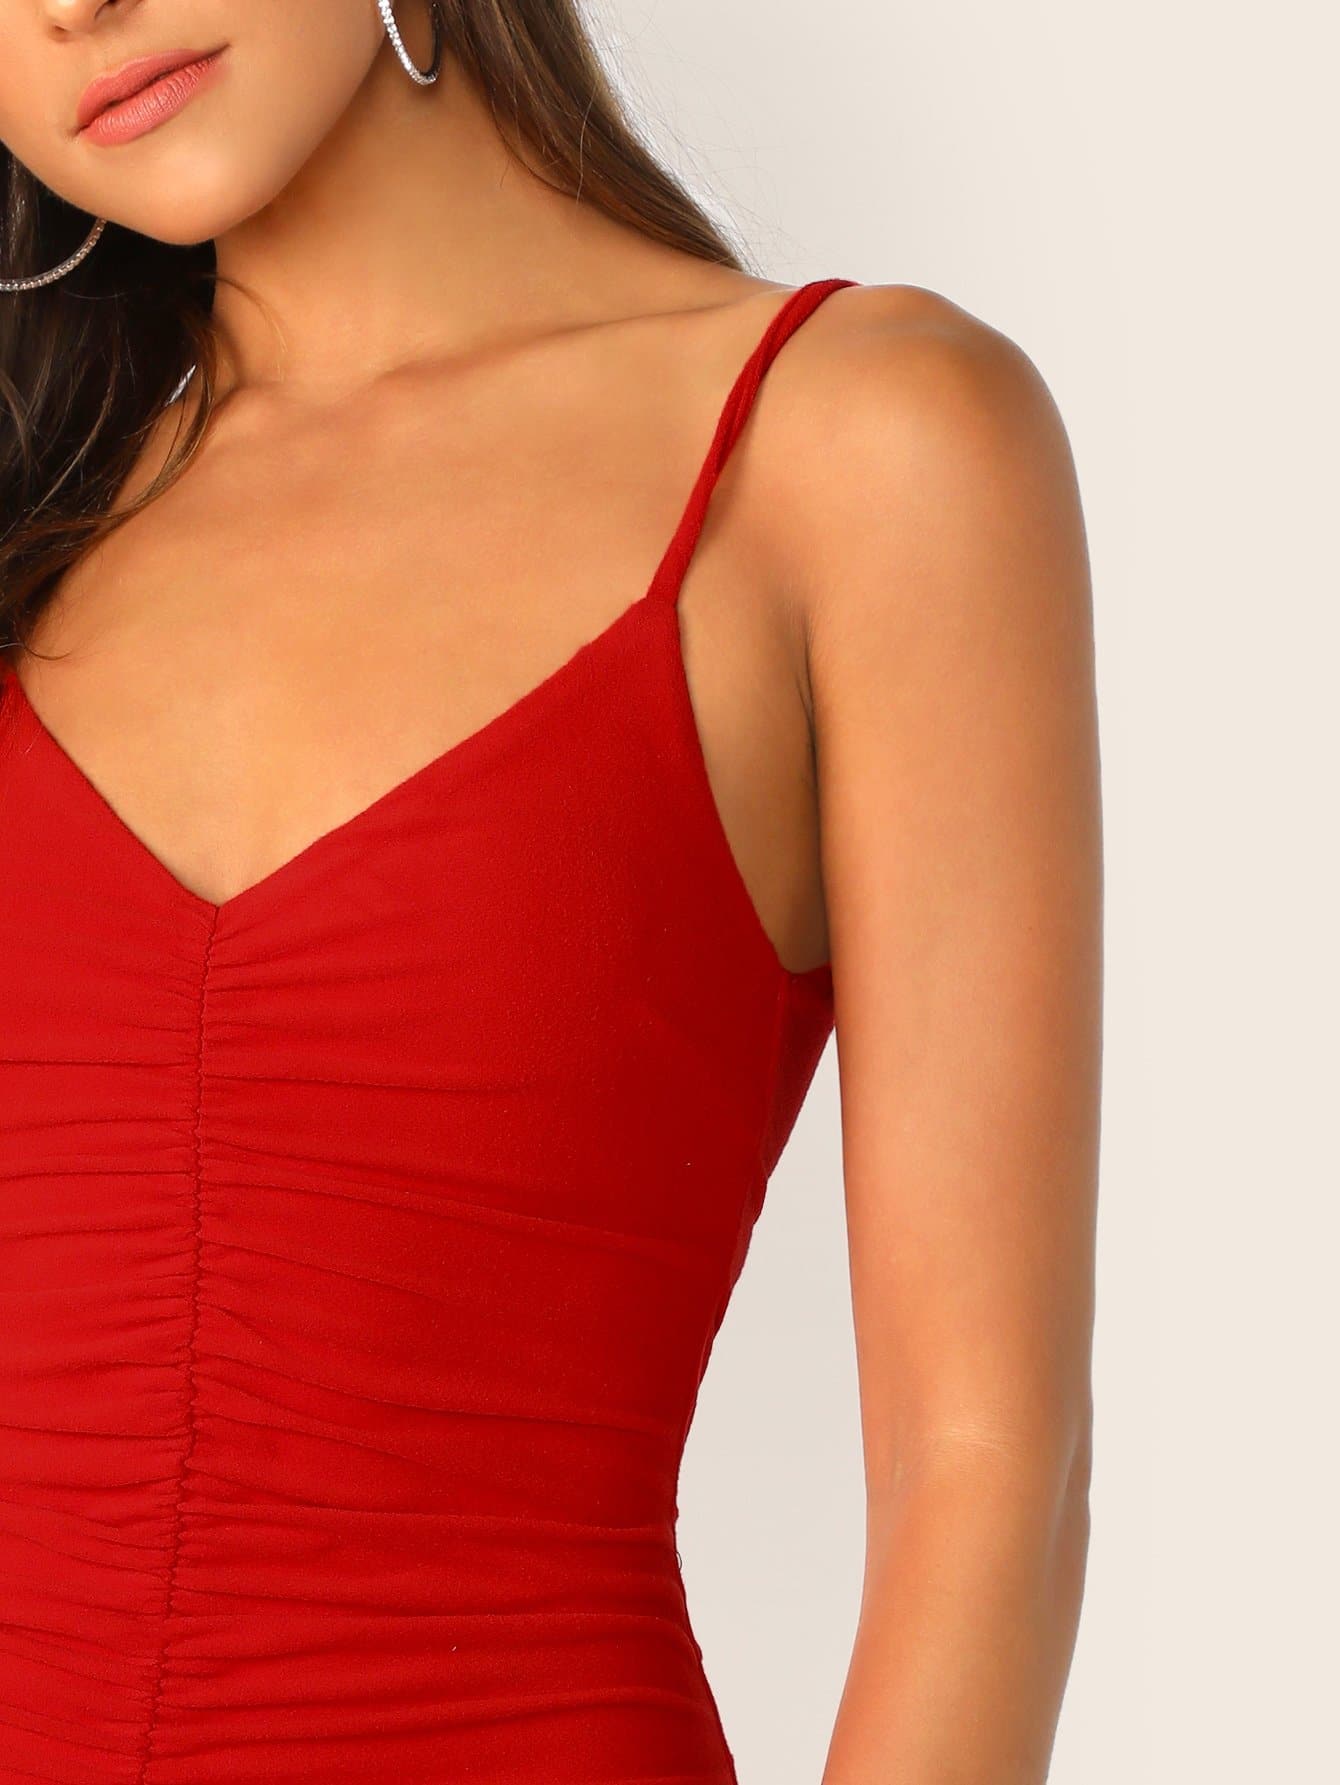 Red Spaghetti Strap Sleeveless Solid Ruched Bodycon Slip Dress